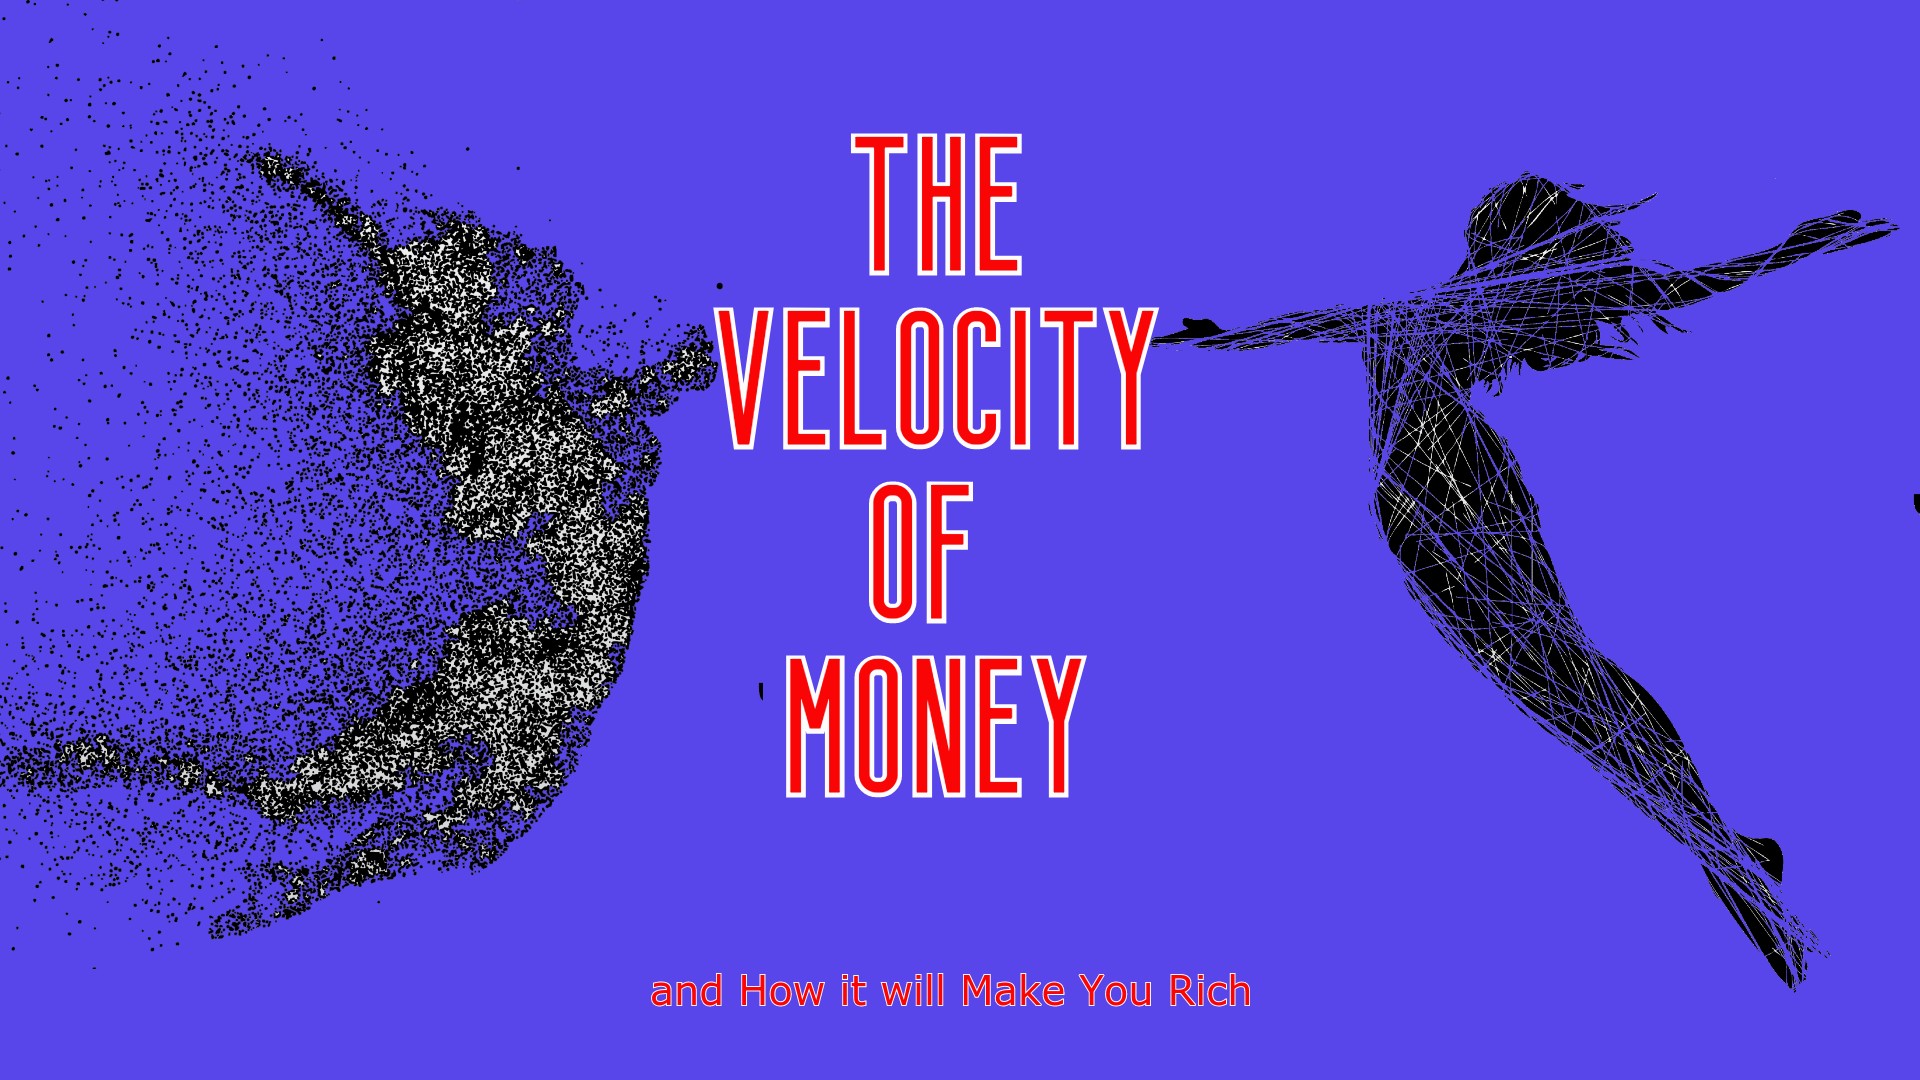 The Velocity of Money and How it will Make You Rich